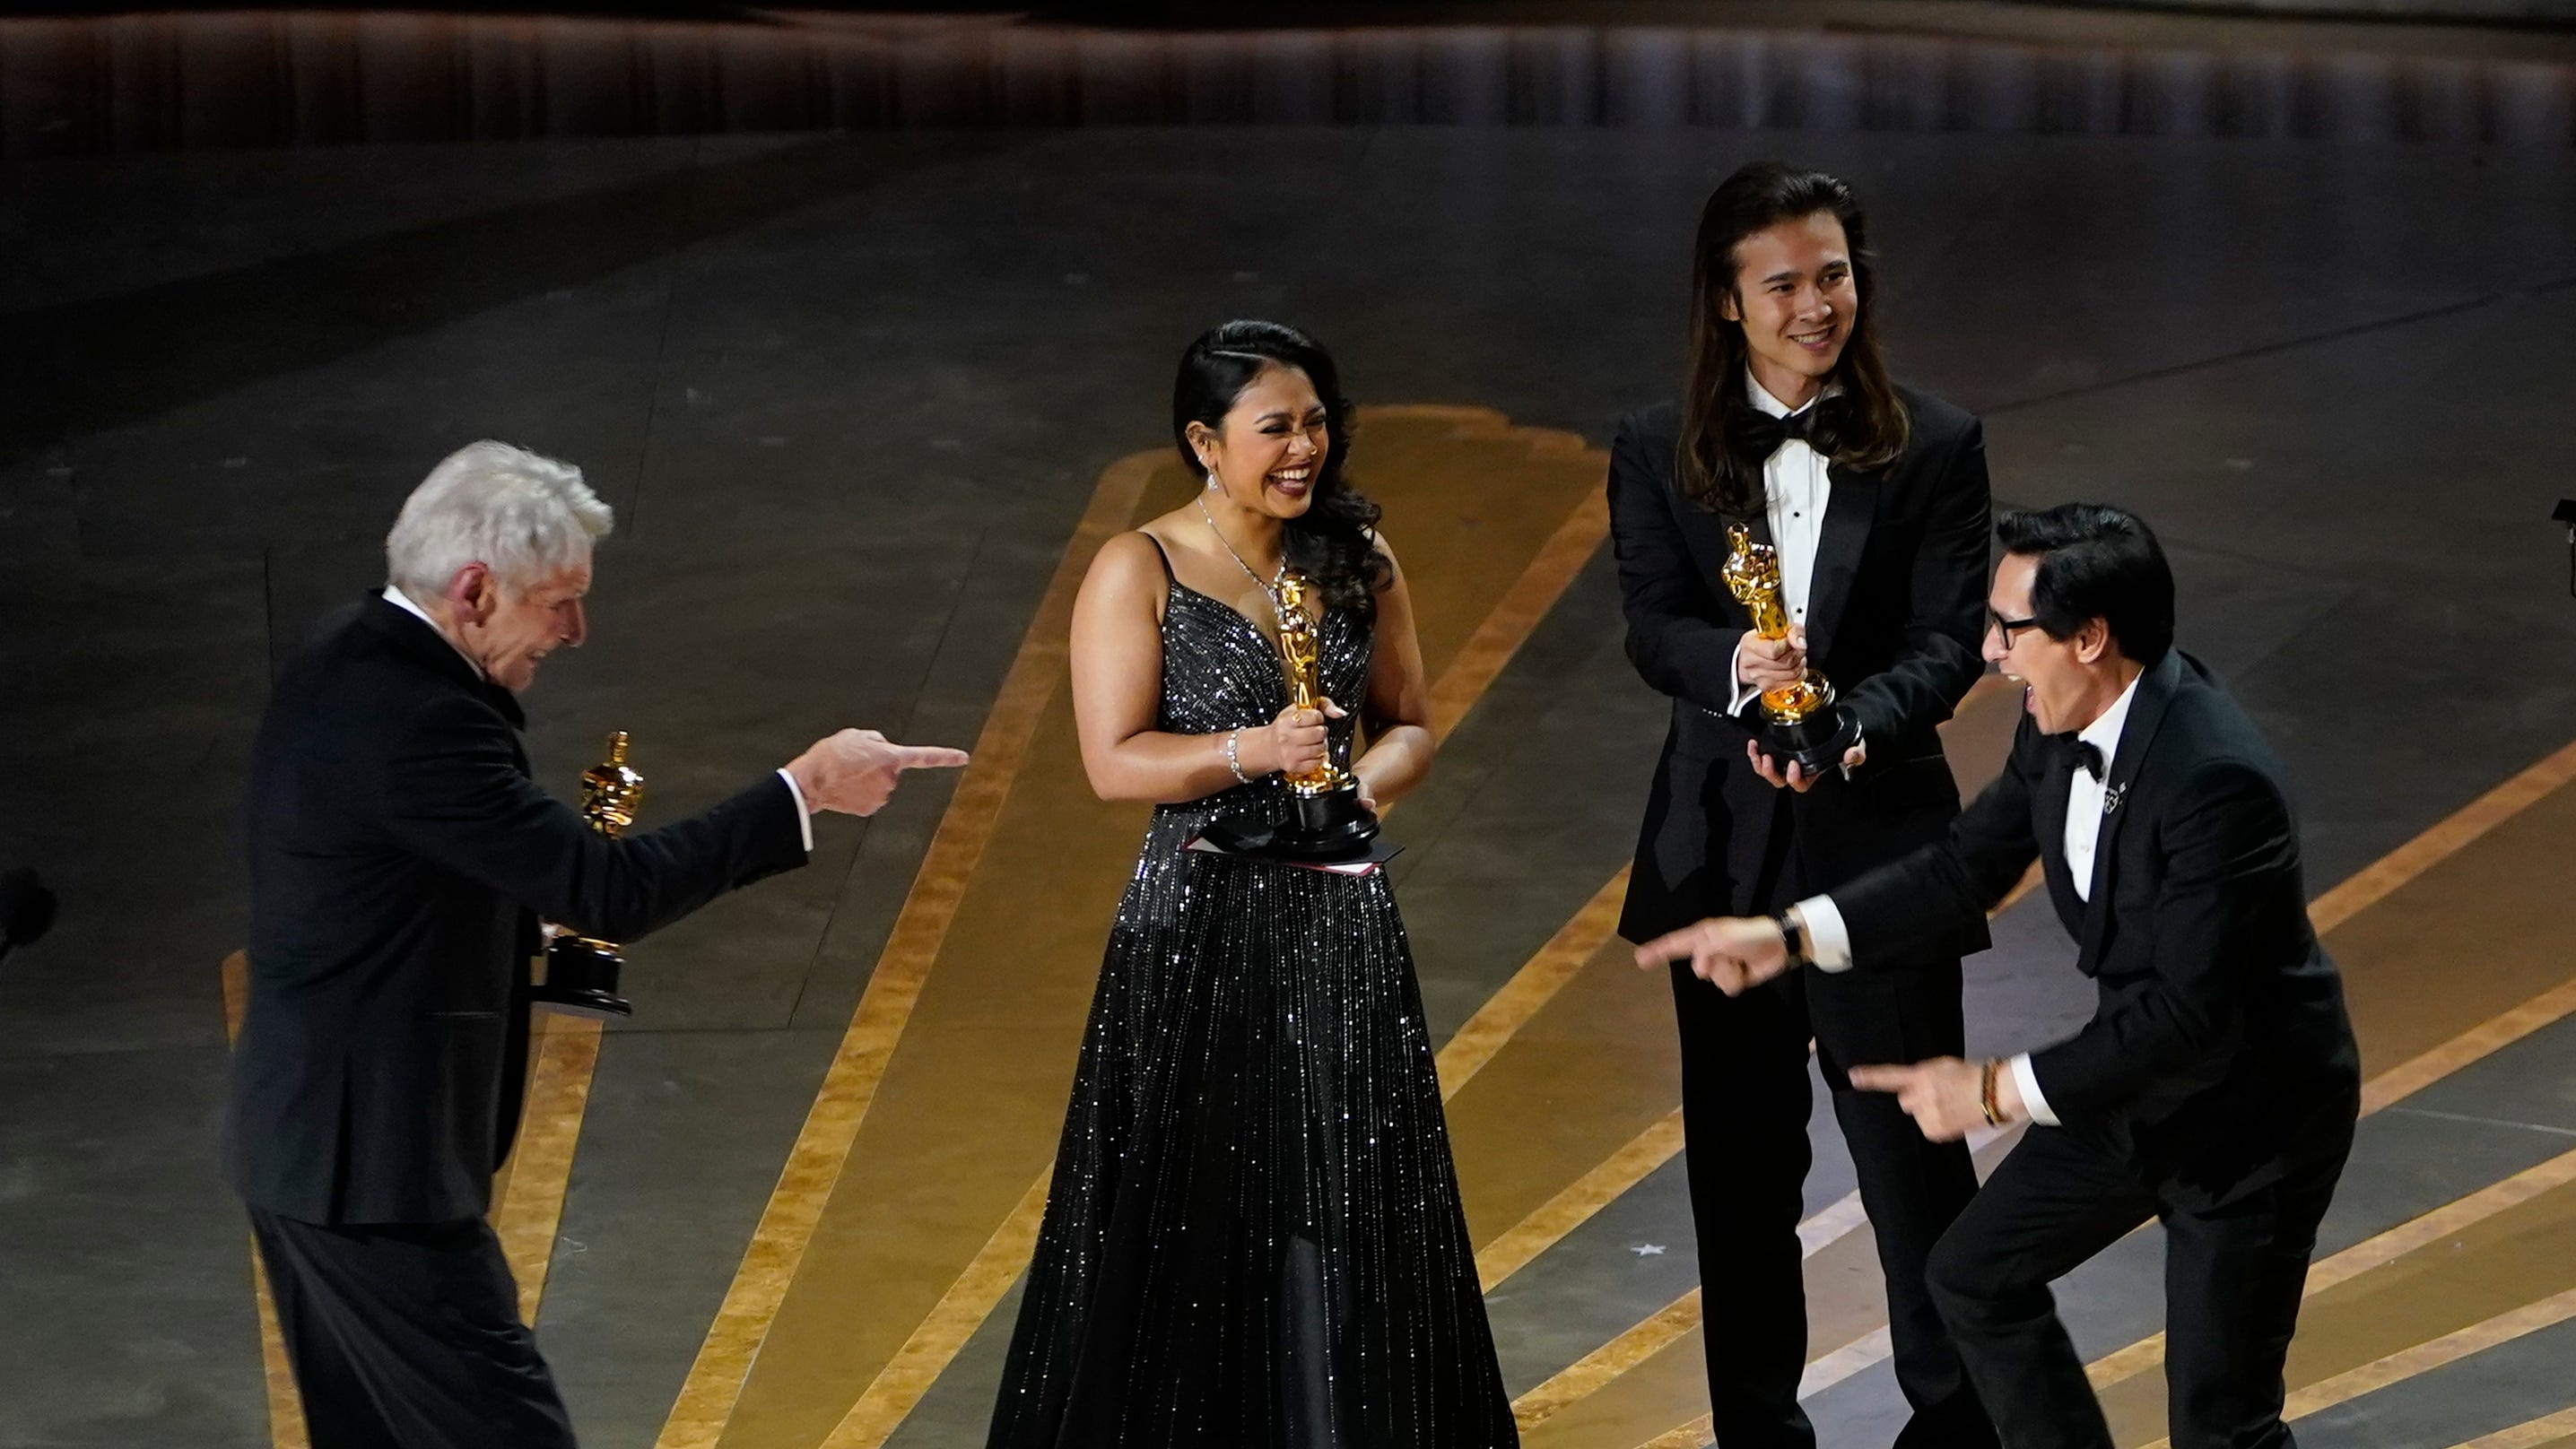 Presenter Harrison Ford celebrates with Ke Huy Quan as "Everything Everywhere All at Once" wins the award for best motion picture.